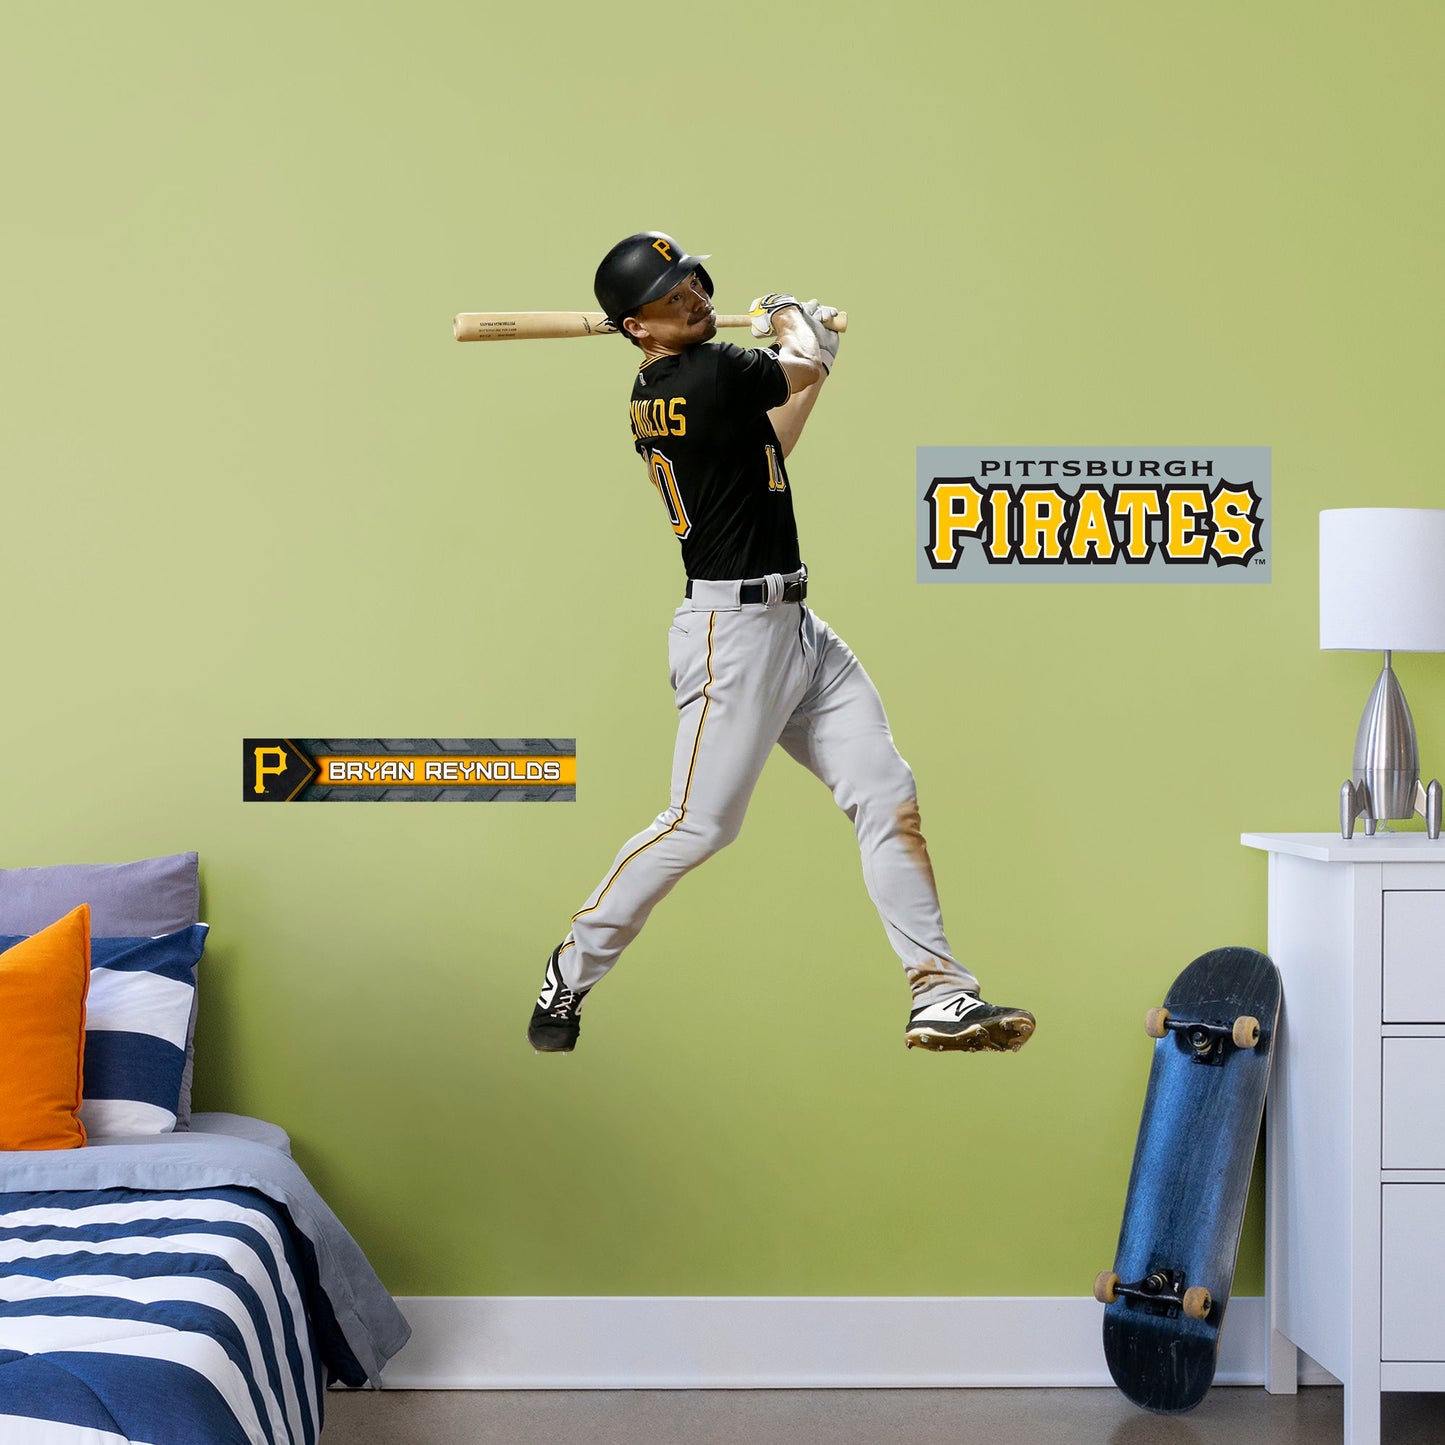 Bryan Reynolds - Officially Licensed MLB Removable Wall Decal